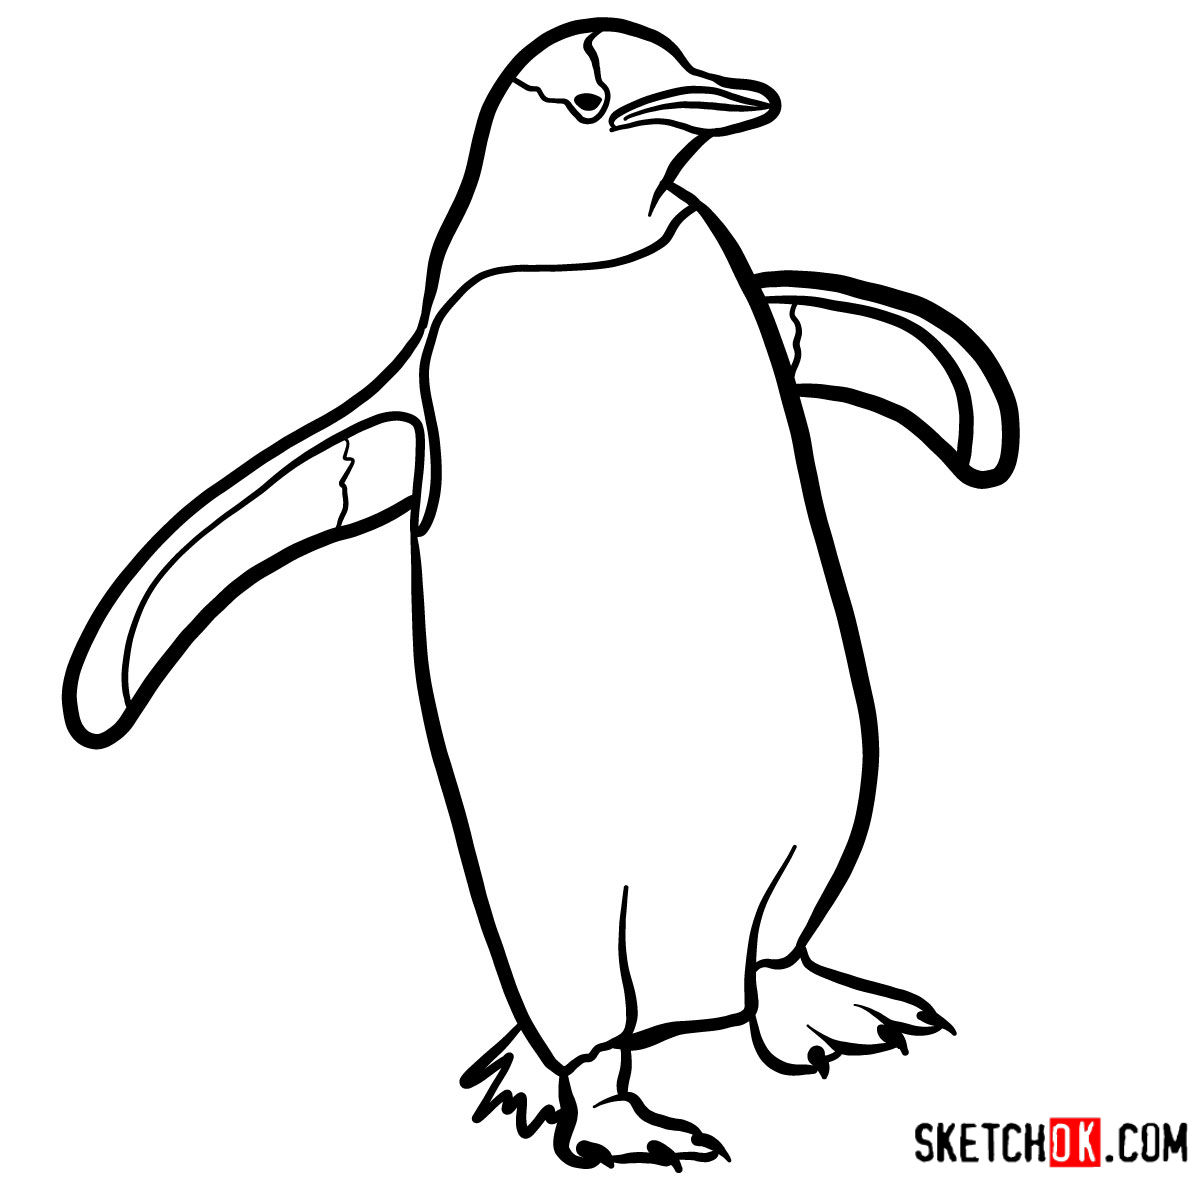 How to draw a Penguin